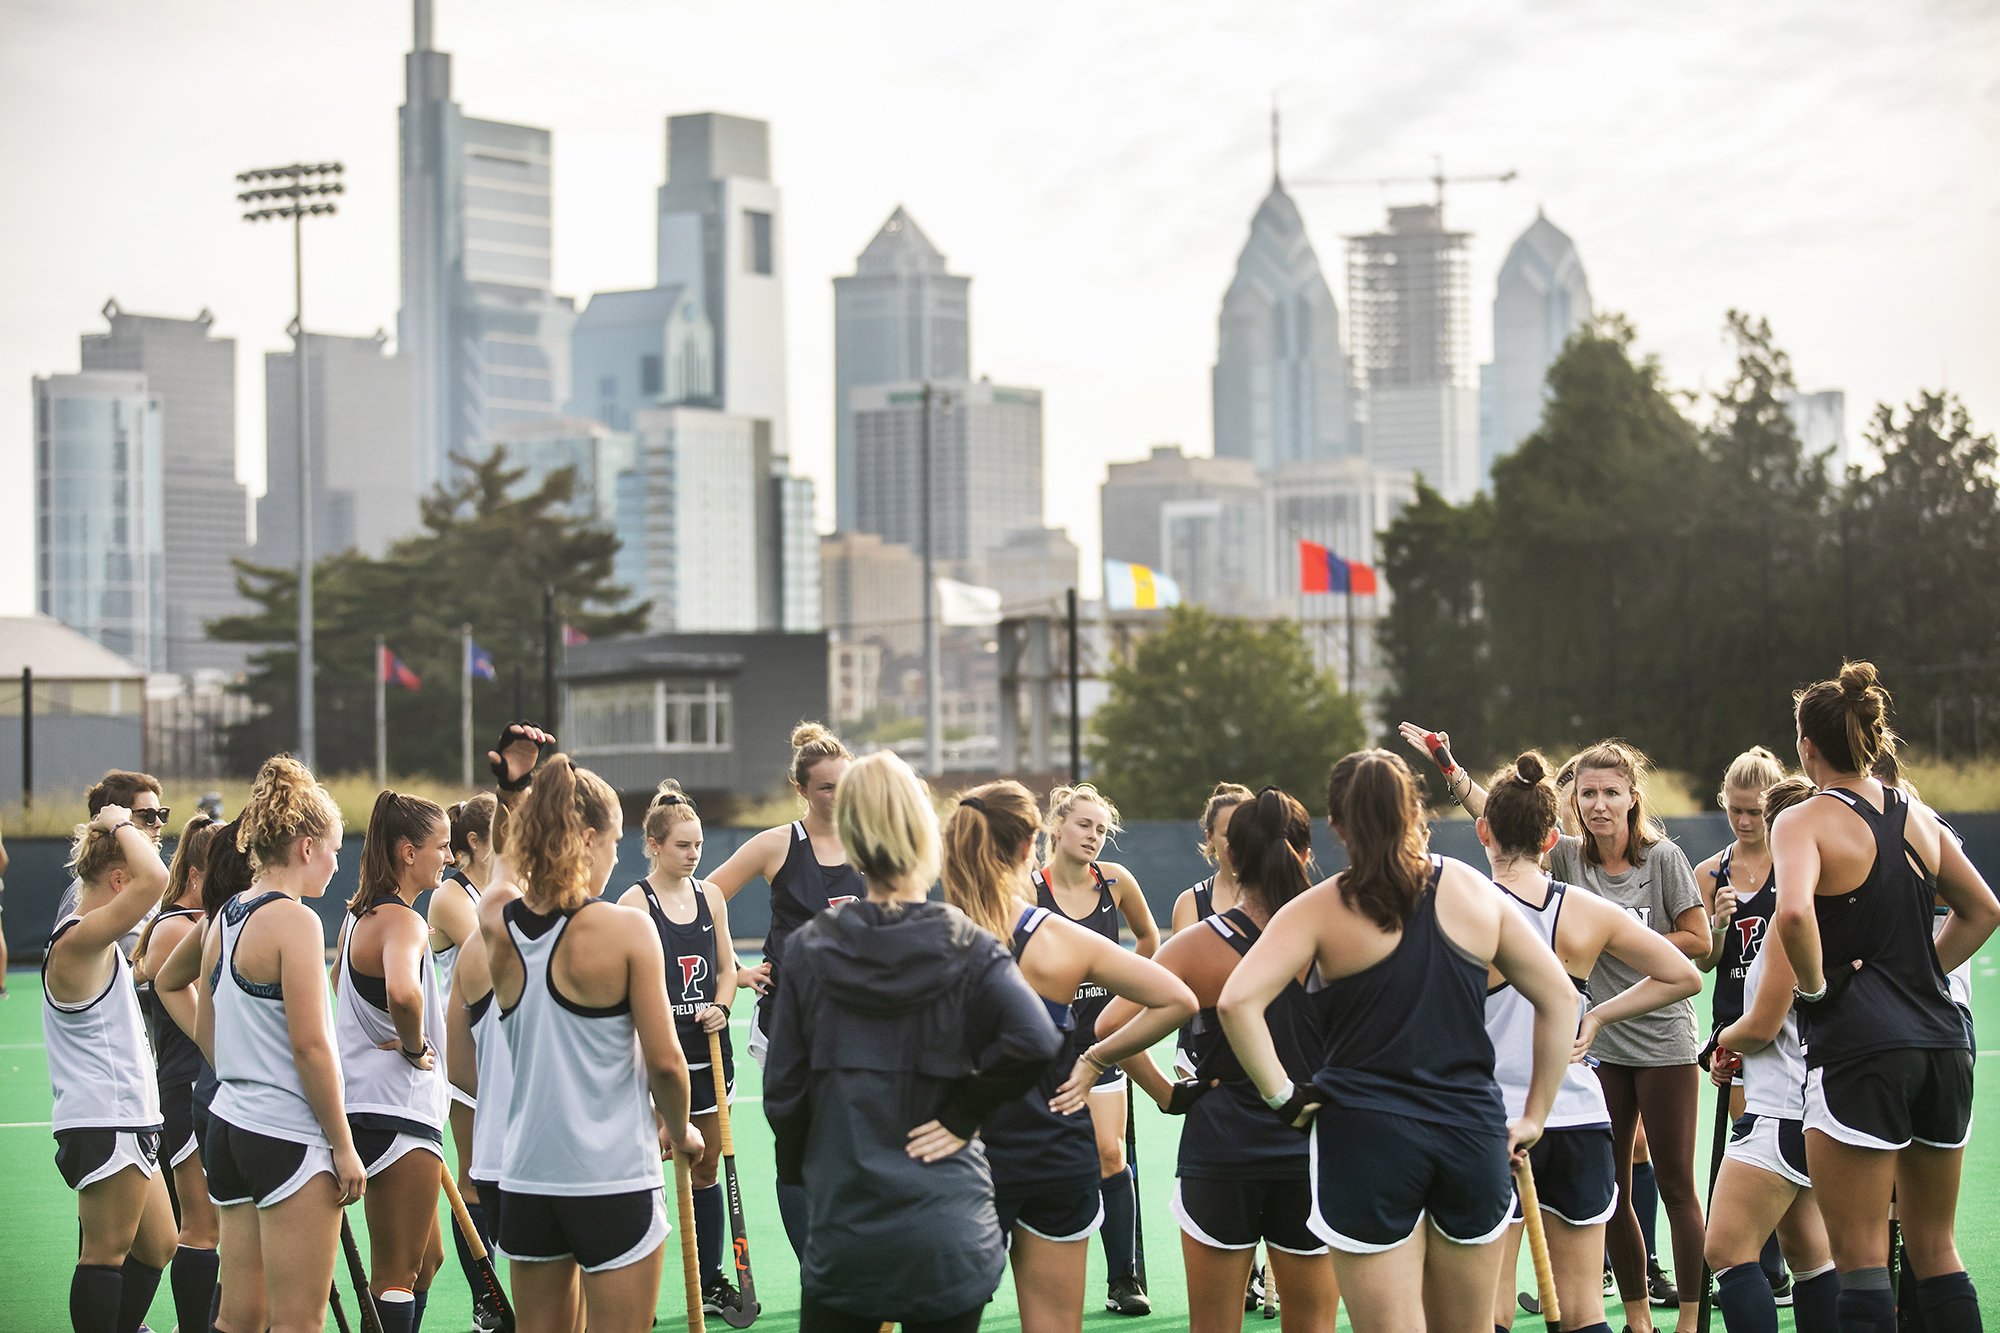 With the Philadelphia skyline in the background, Coach Colleen Fink addresses her players in a circle at Vagelos Field. All are standing.